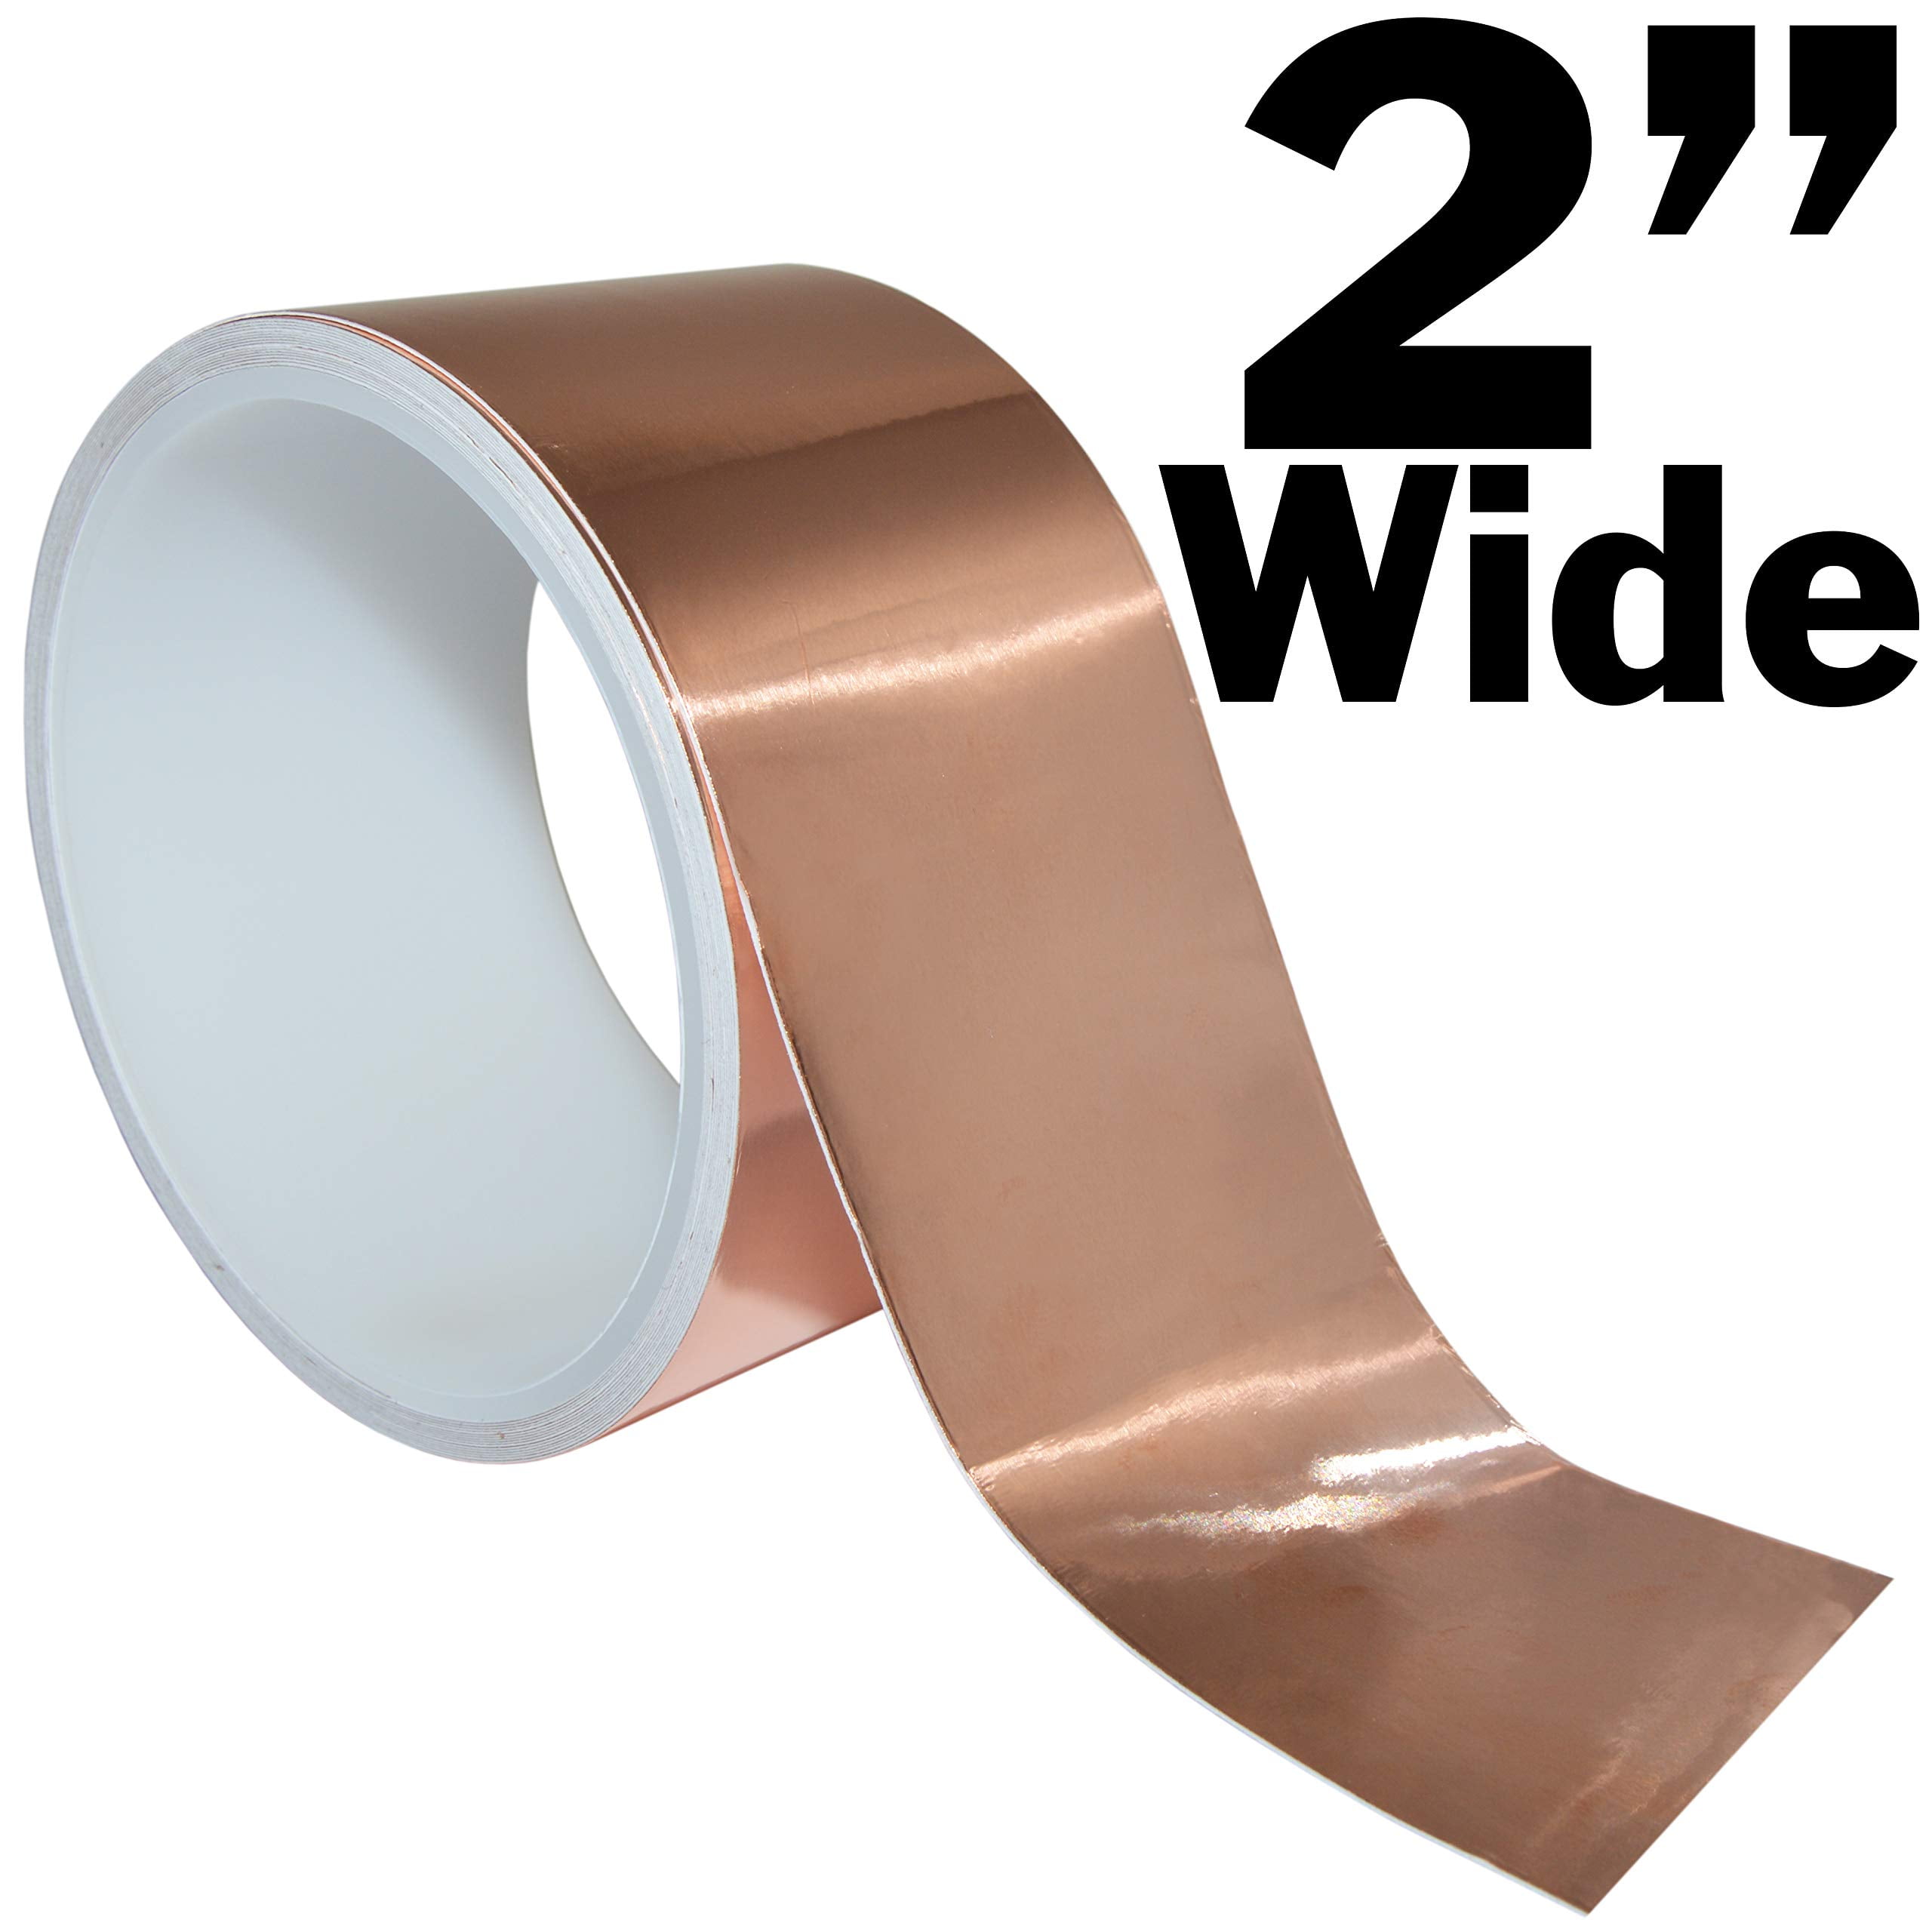 16 Feet of 2 Inch Wide Copper Foil Tape with Adhesive - Conductive on Both  Sides for EMI Shielding, Electrical Repairs, Engineering Projects, Arts 